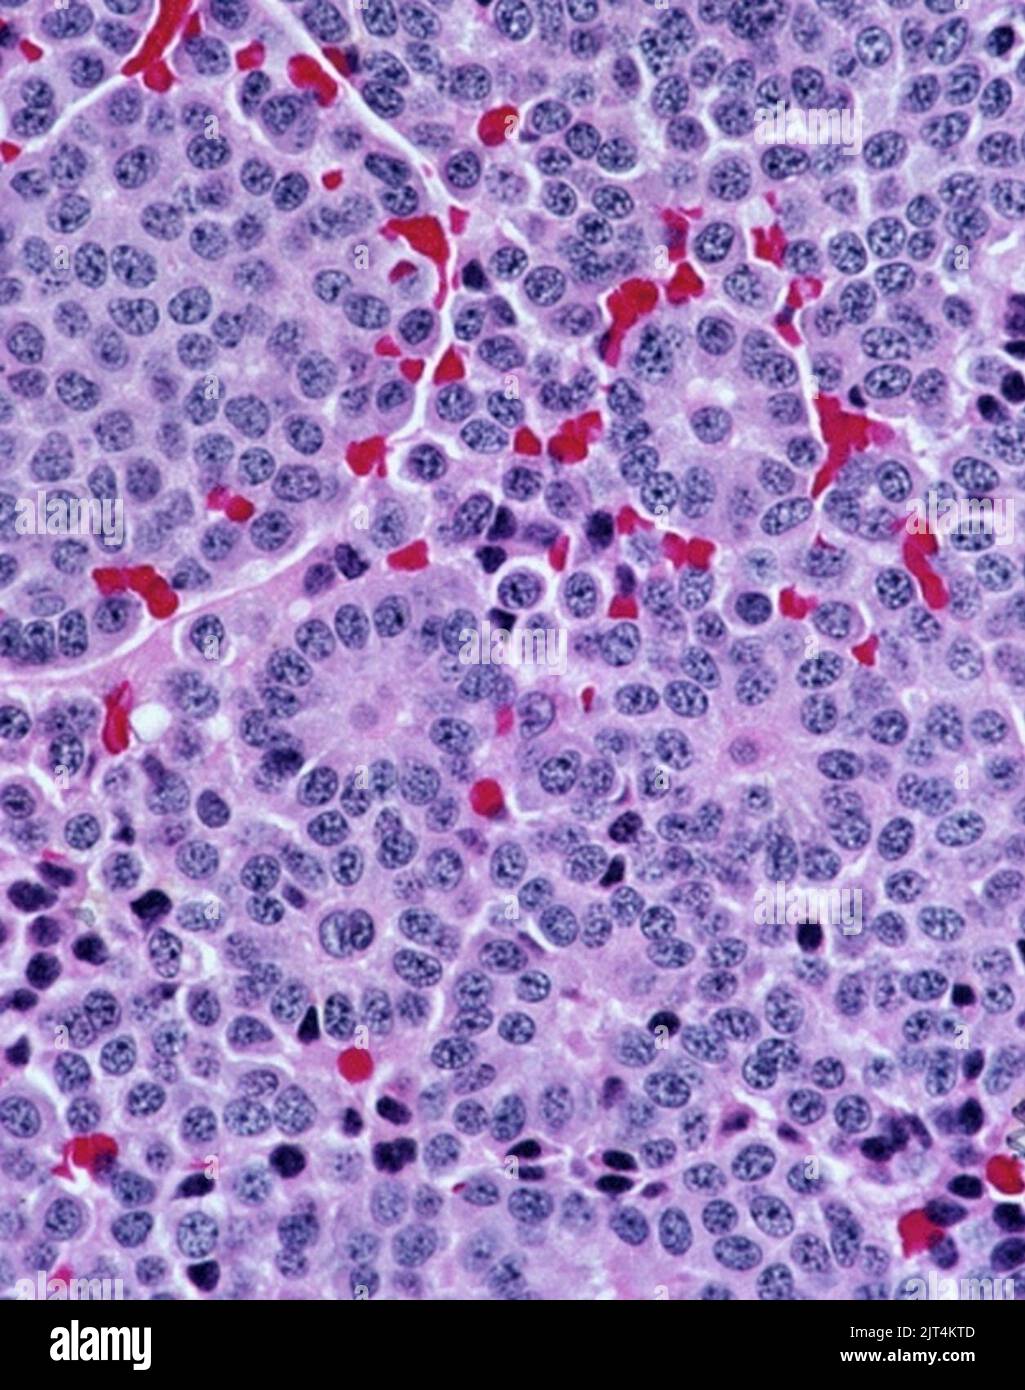 Typical carcinoid tumor of the lung, prominent rosettes. Stock Photo